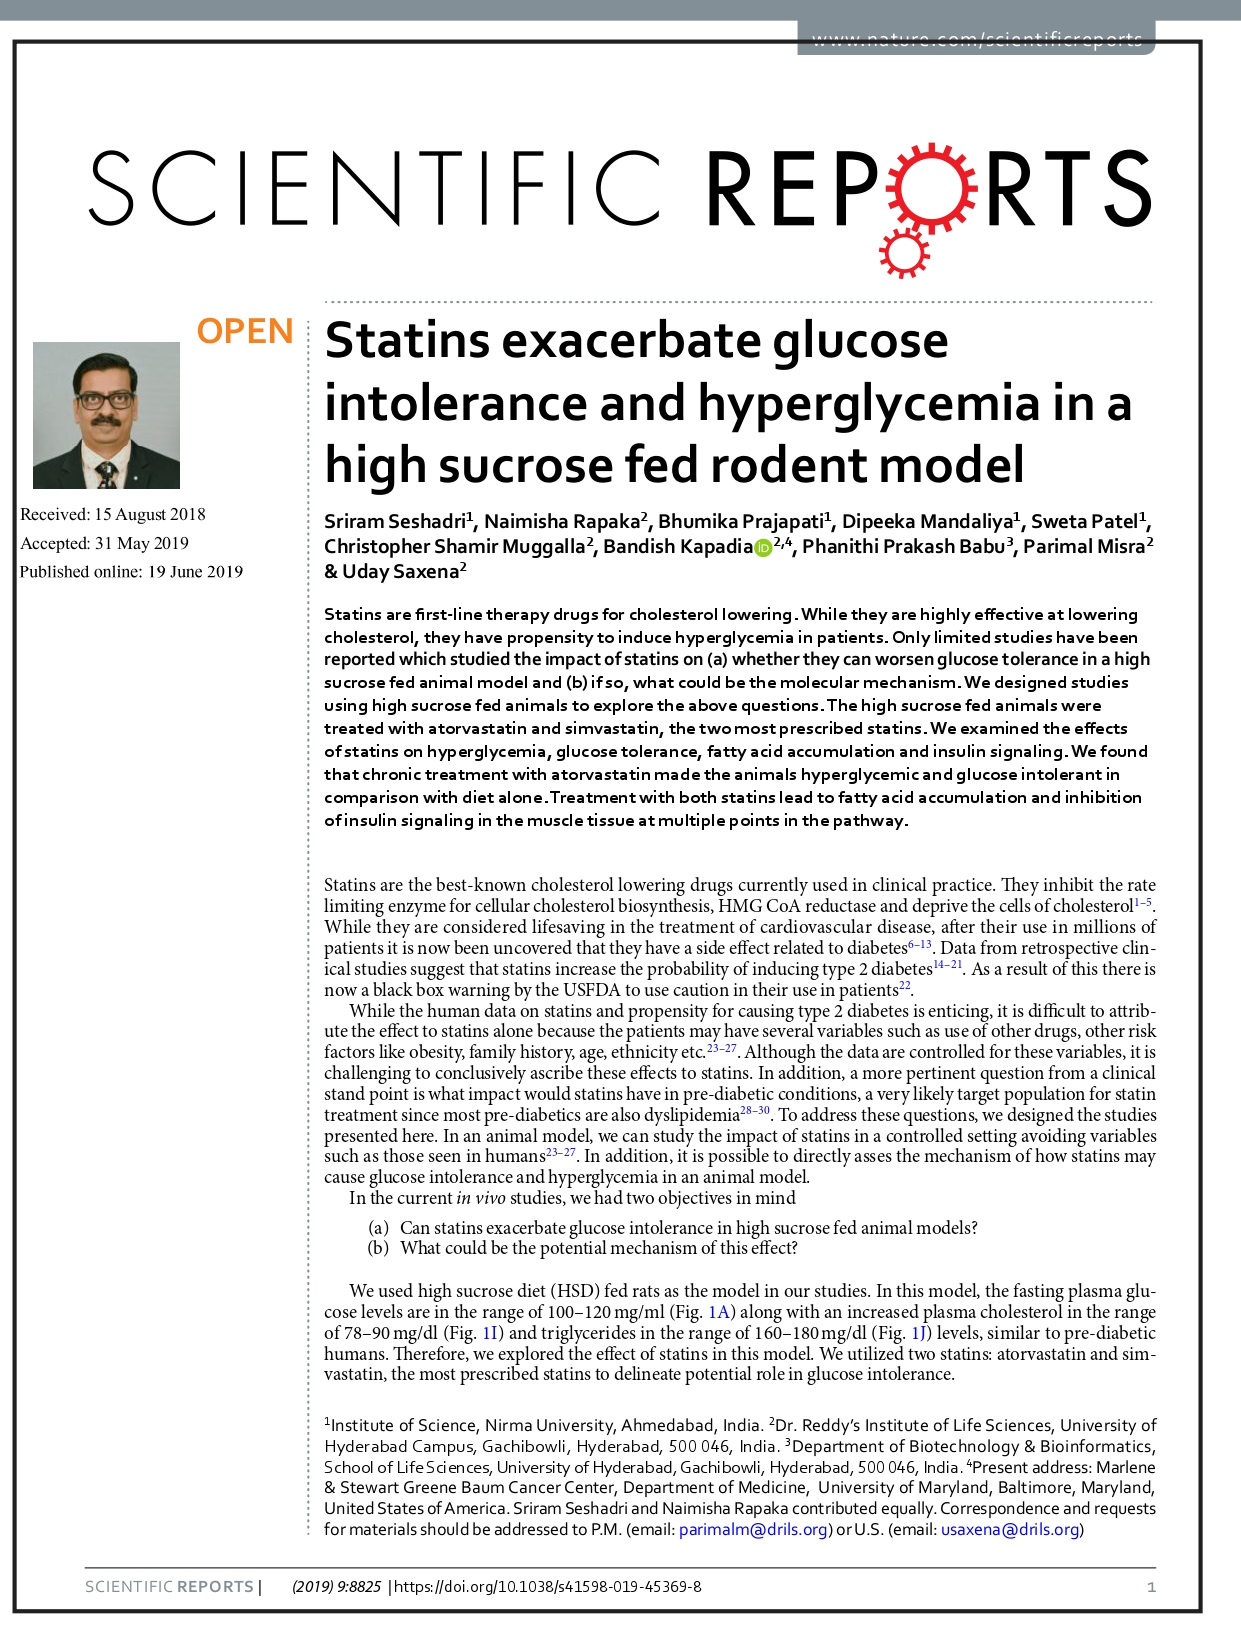 Statins exacerbate glucose intolerance and hyperglycemia in a high sucrose fed rodent model